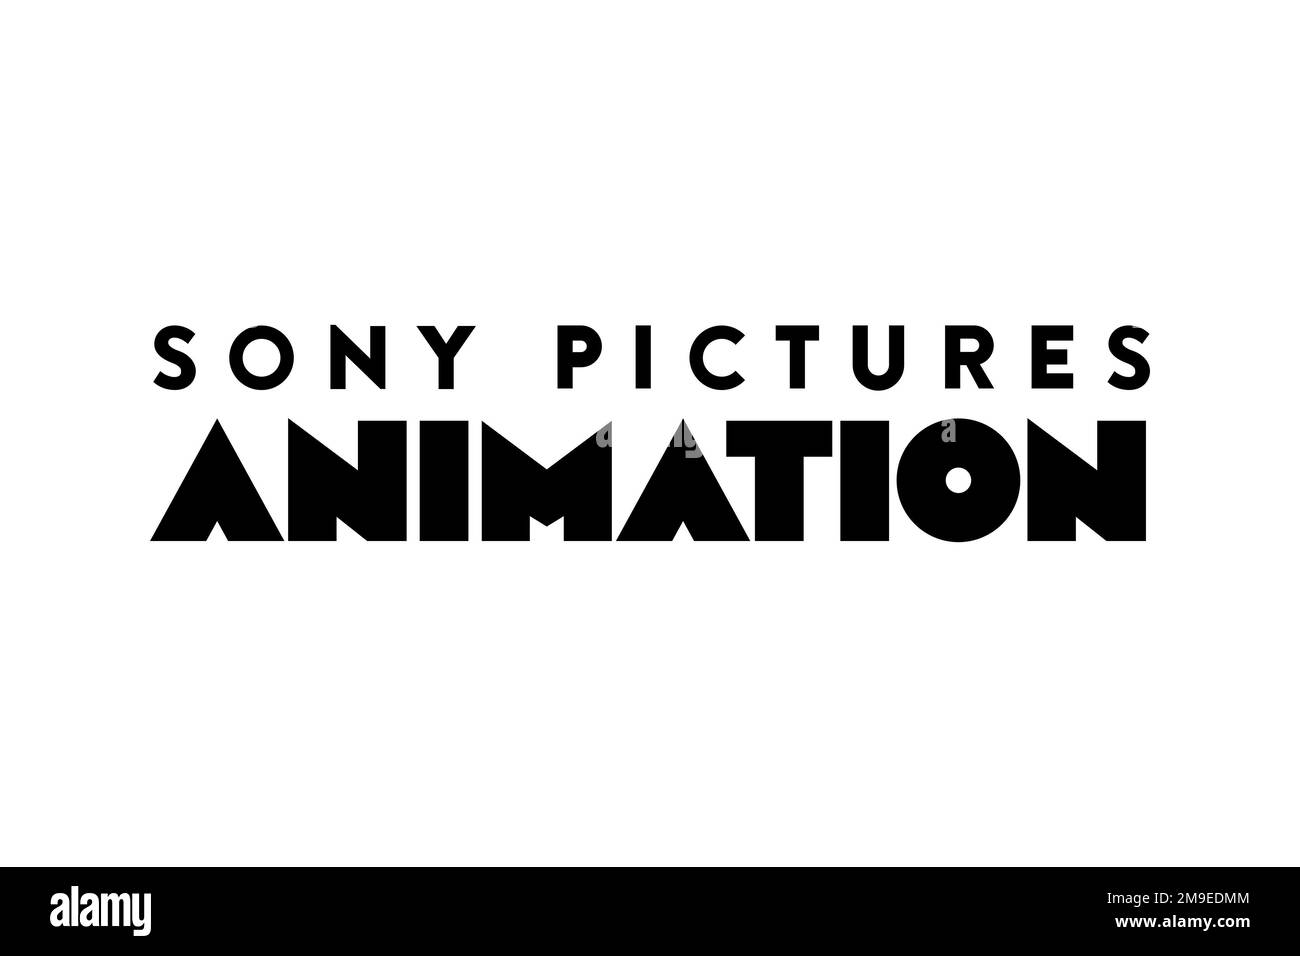 Sony Pictures animation, logo, fond blanc Banque D'Images